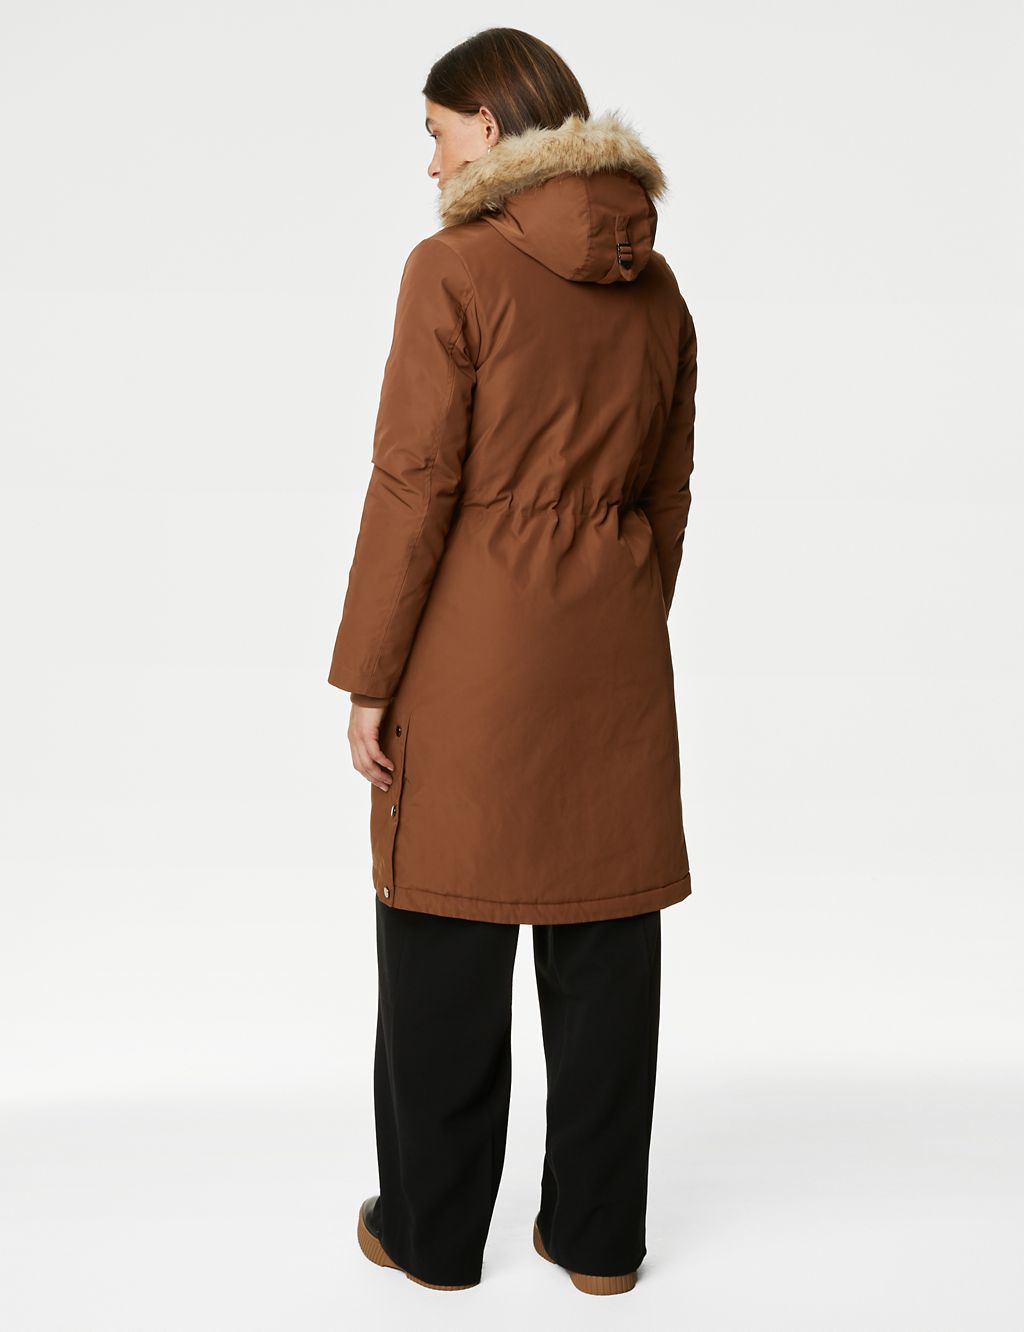 Stormwear™ Textured Hooded Parka Coat | M&S Collection | M&S